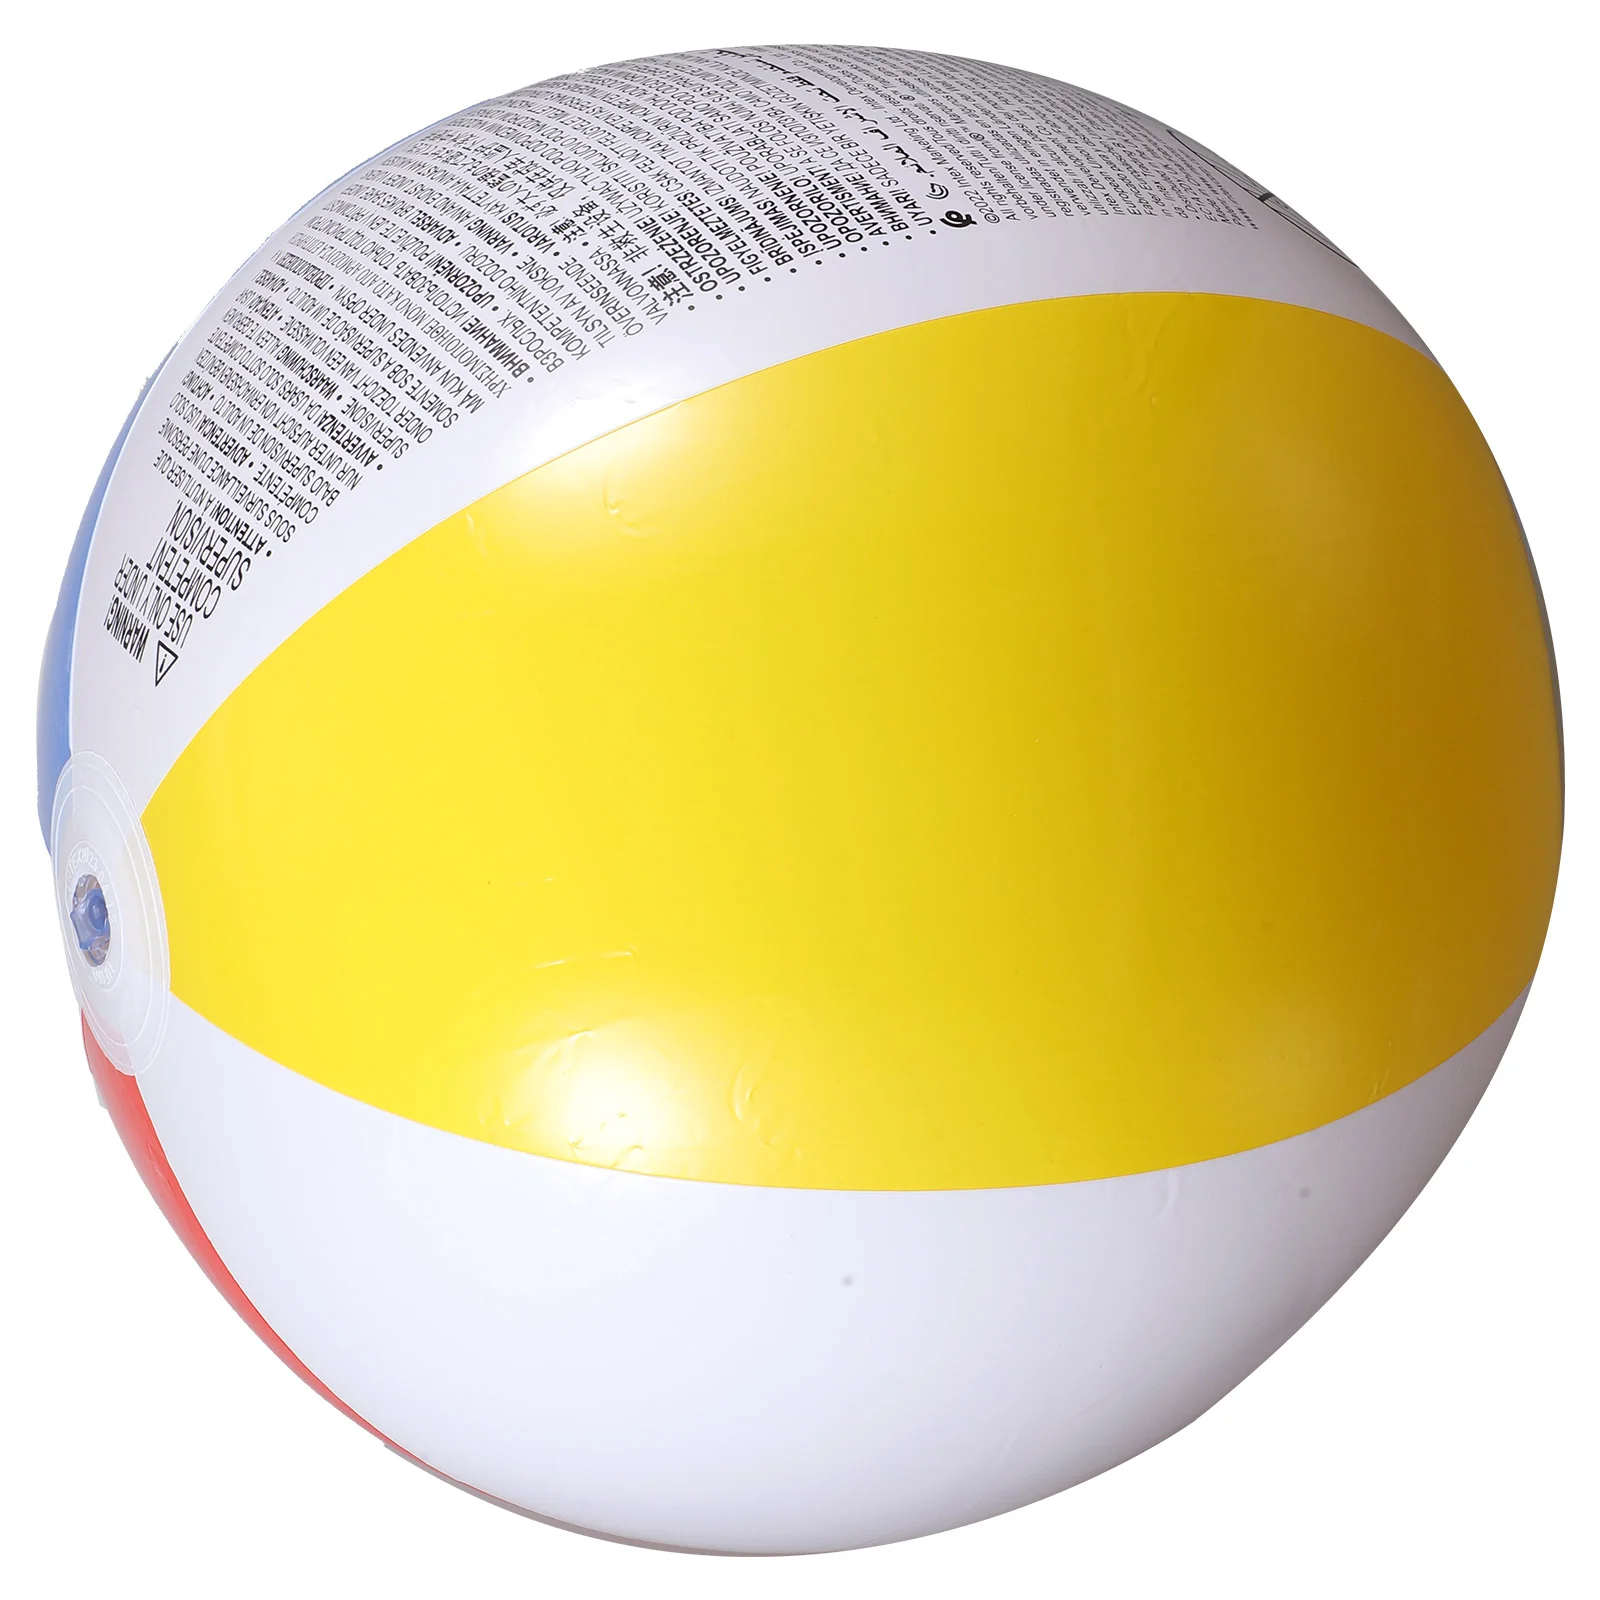 

Four-color Beach Ball Inflatable 59020 Uninflated Diameter 51cm Toys Sport Balls Large Giant Bulk Blowing up Swimming Pool Pvc